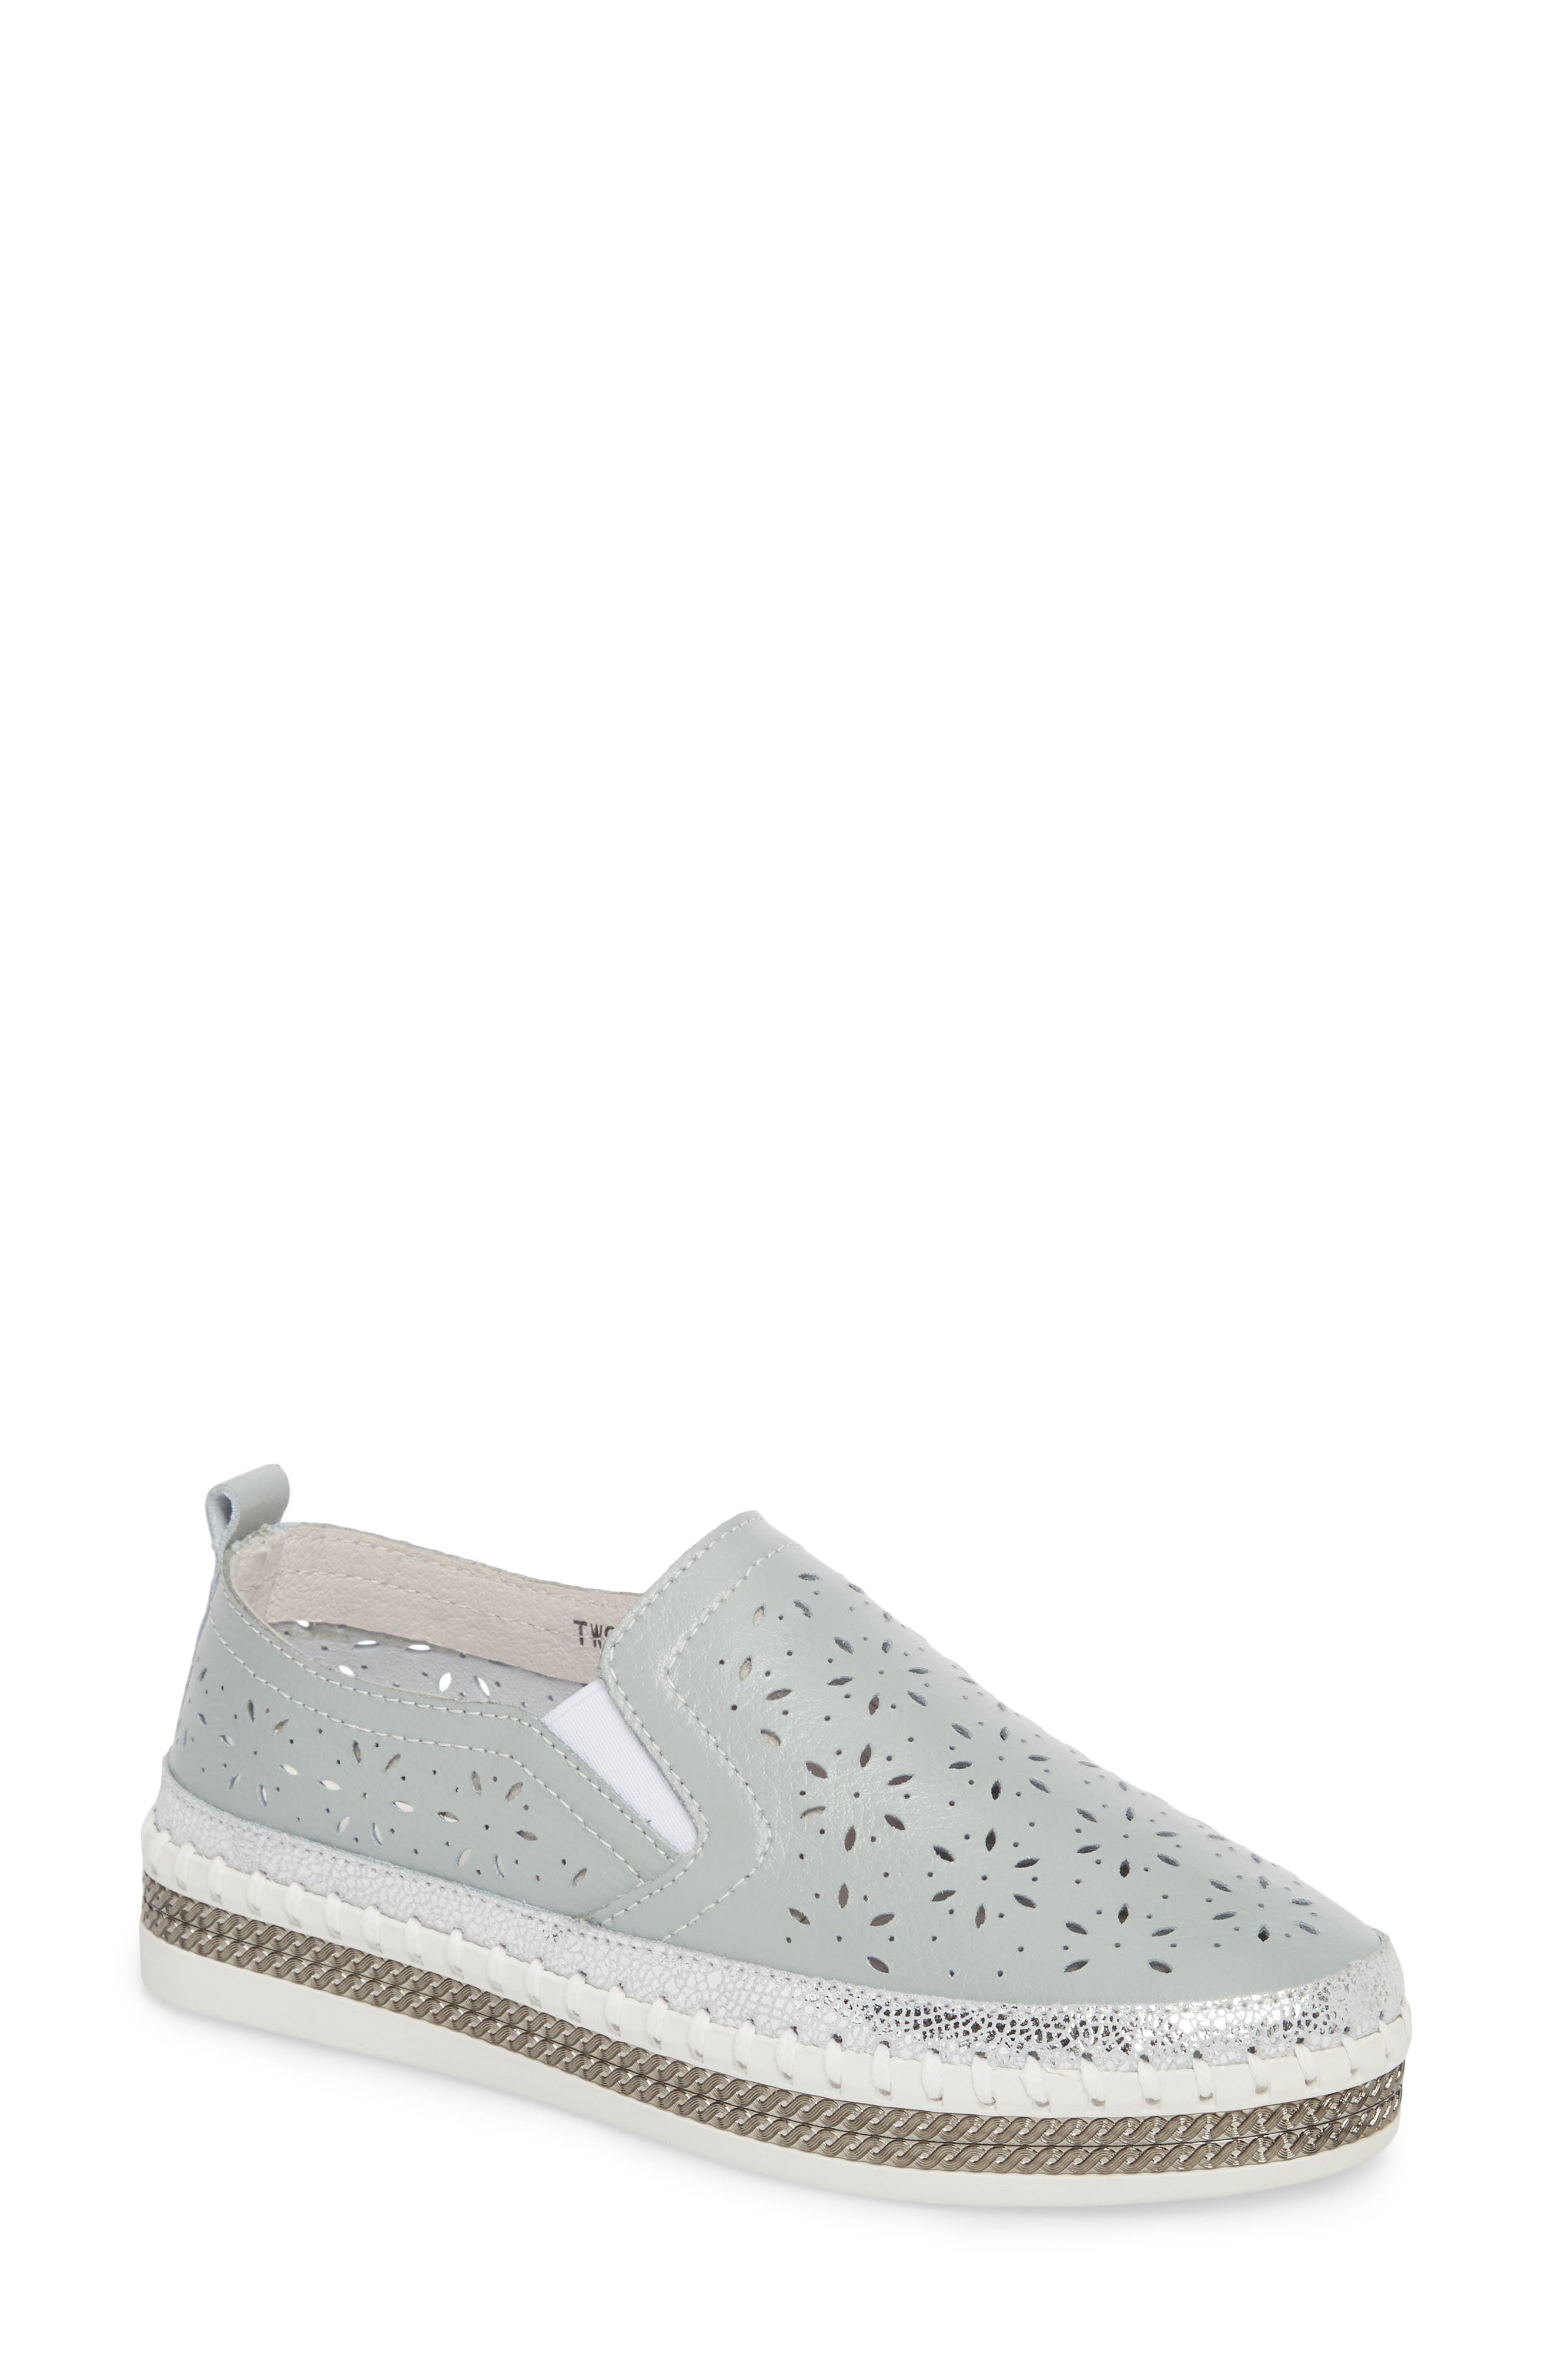 bernie mev. Perforated Slip-On Sneaker in Mint Leather at Nordstrom